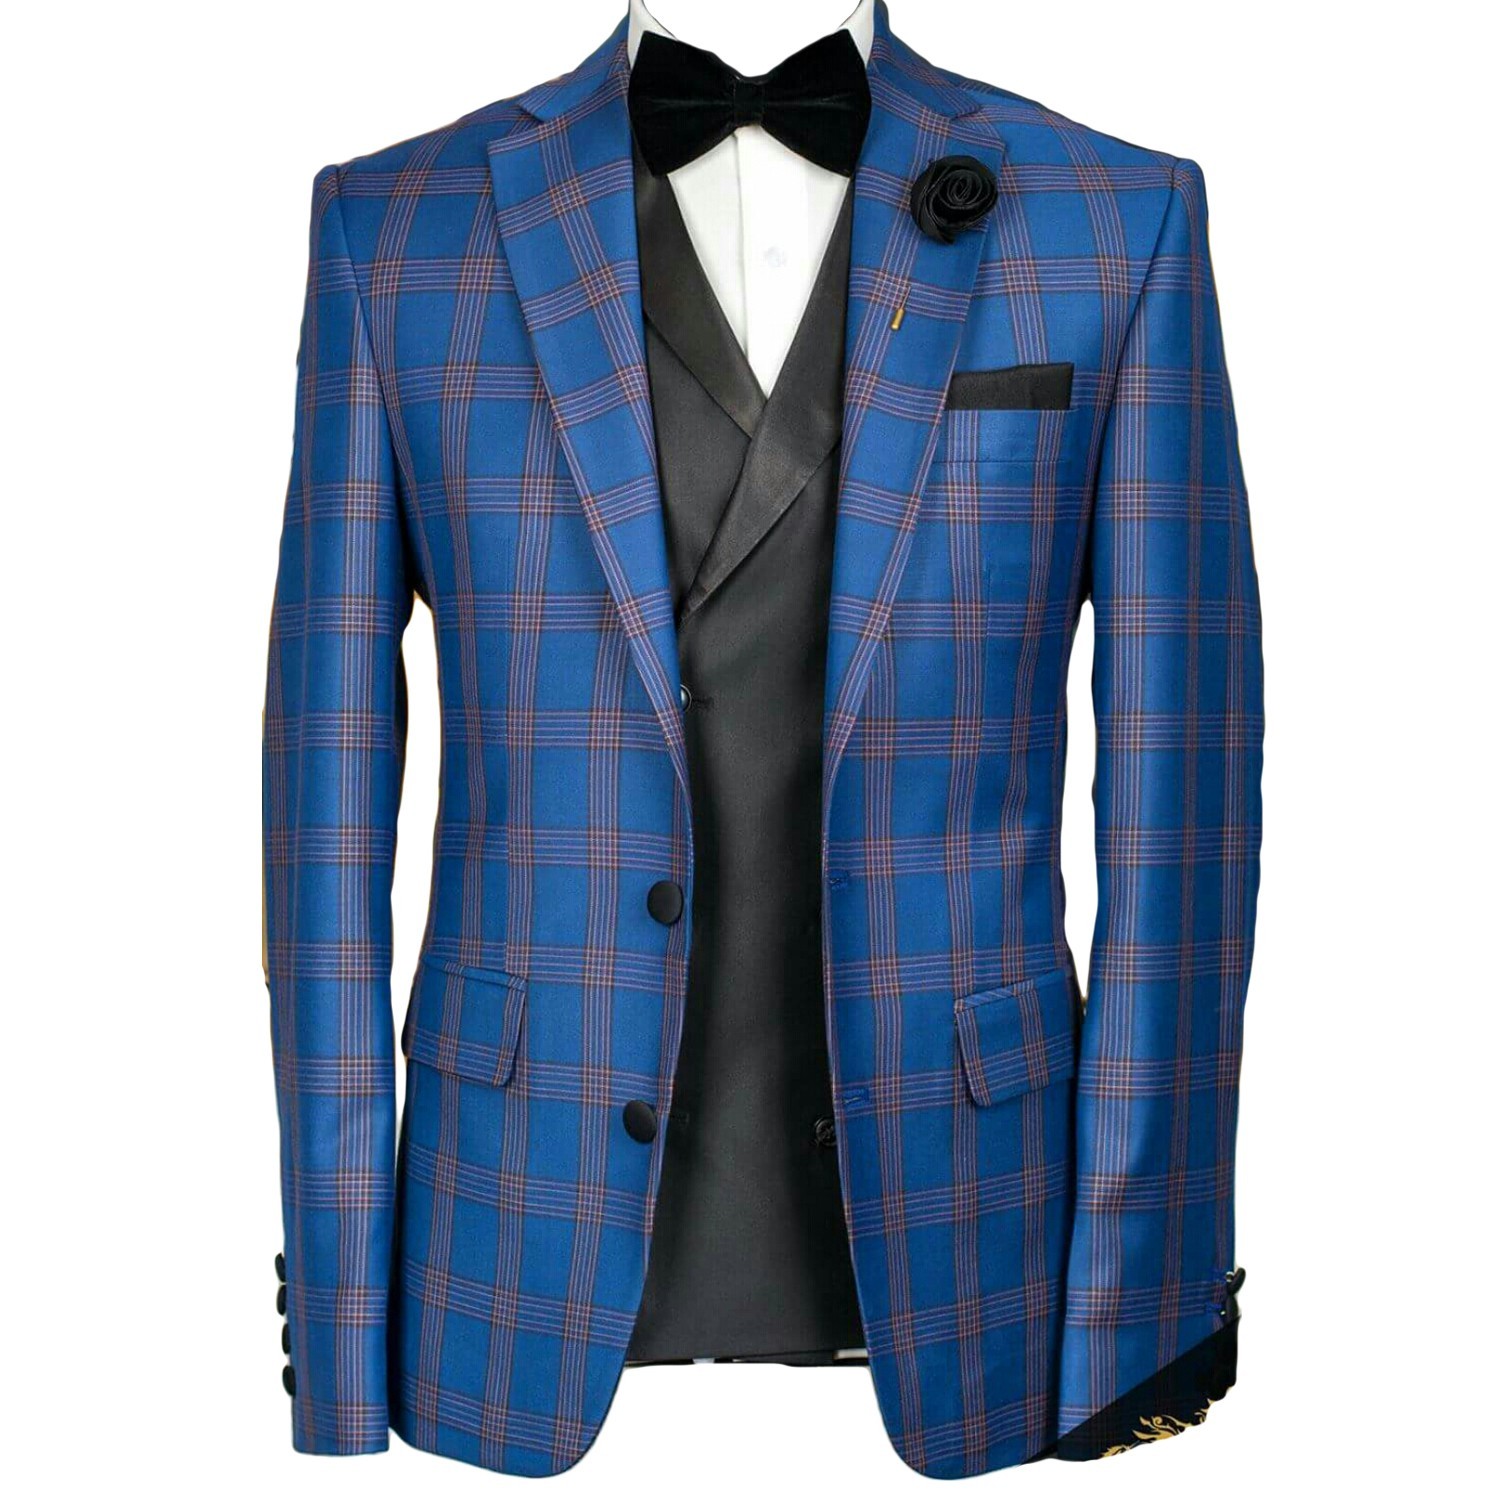 Men’s Bespoke Three Piece Suit -Outfit Code 8052 1